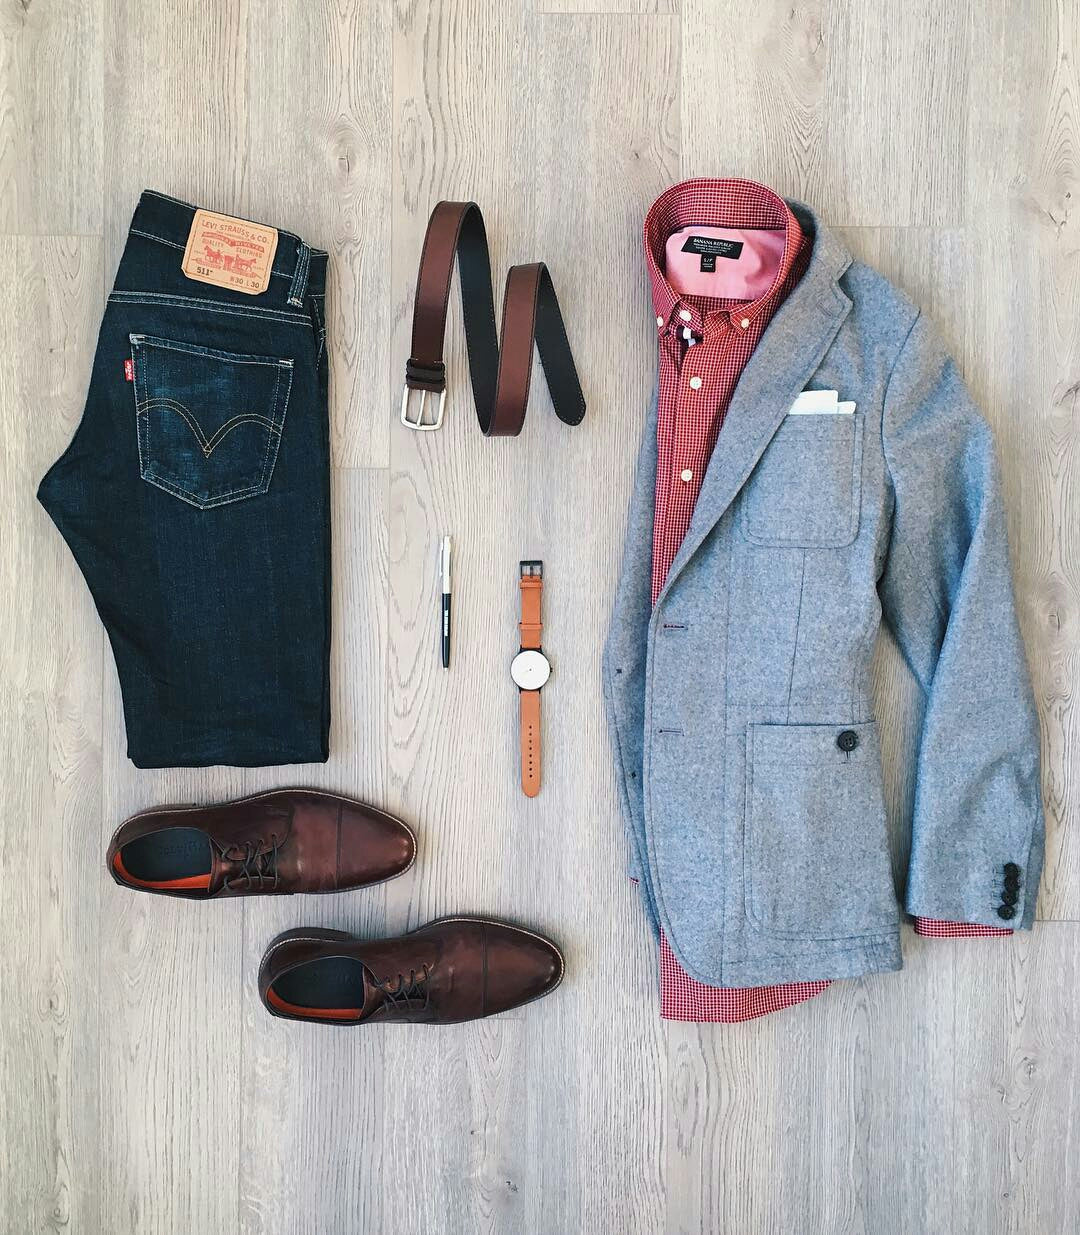 Work outfit ideas for men #mens #fashion #style